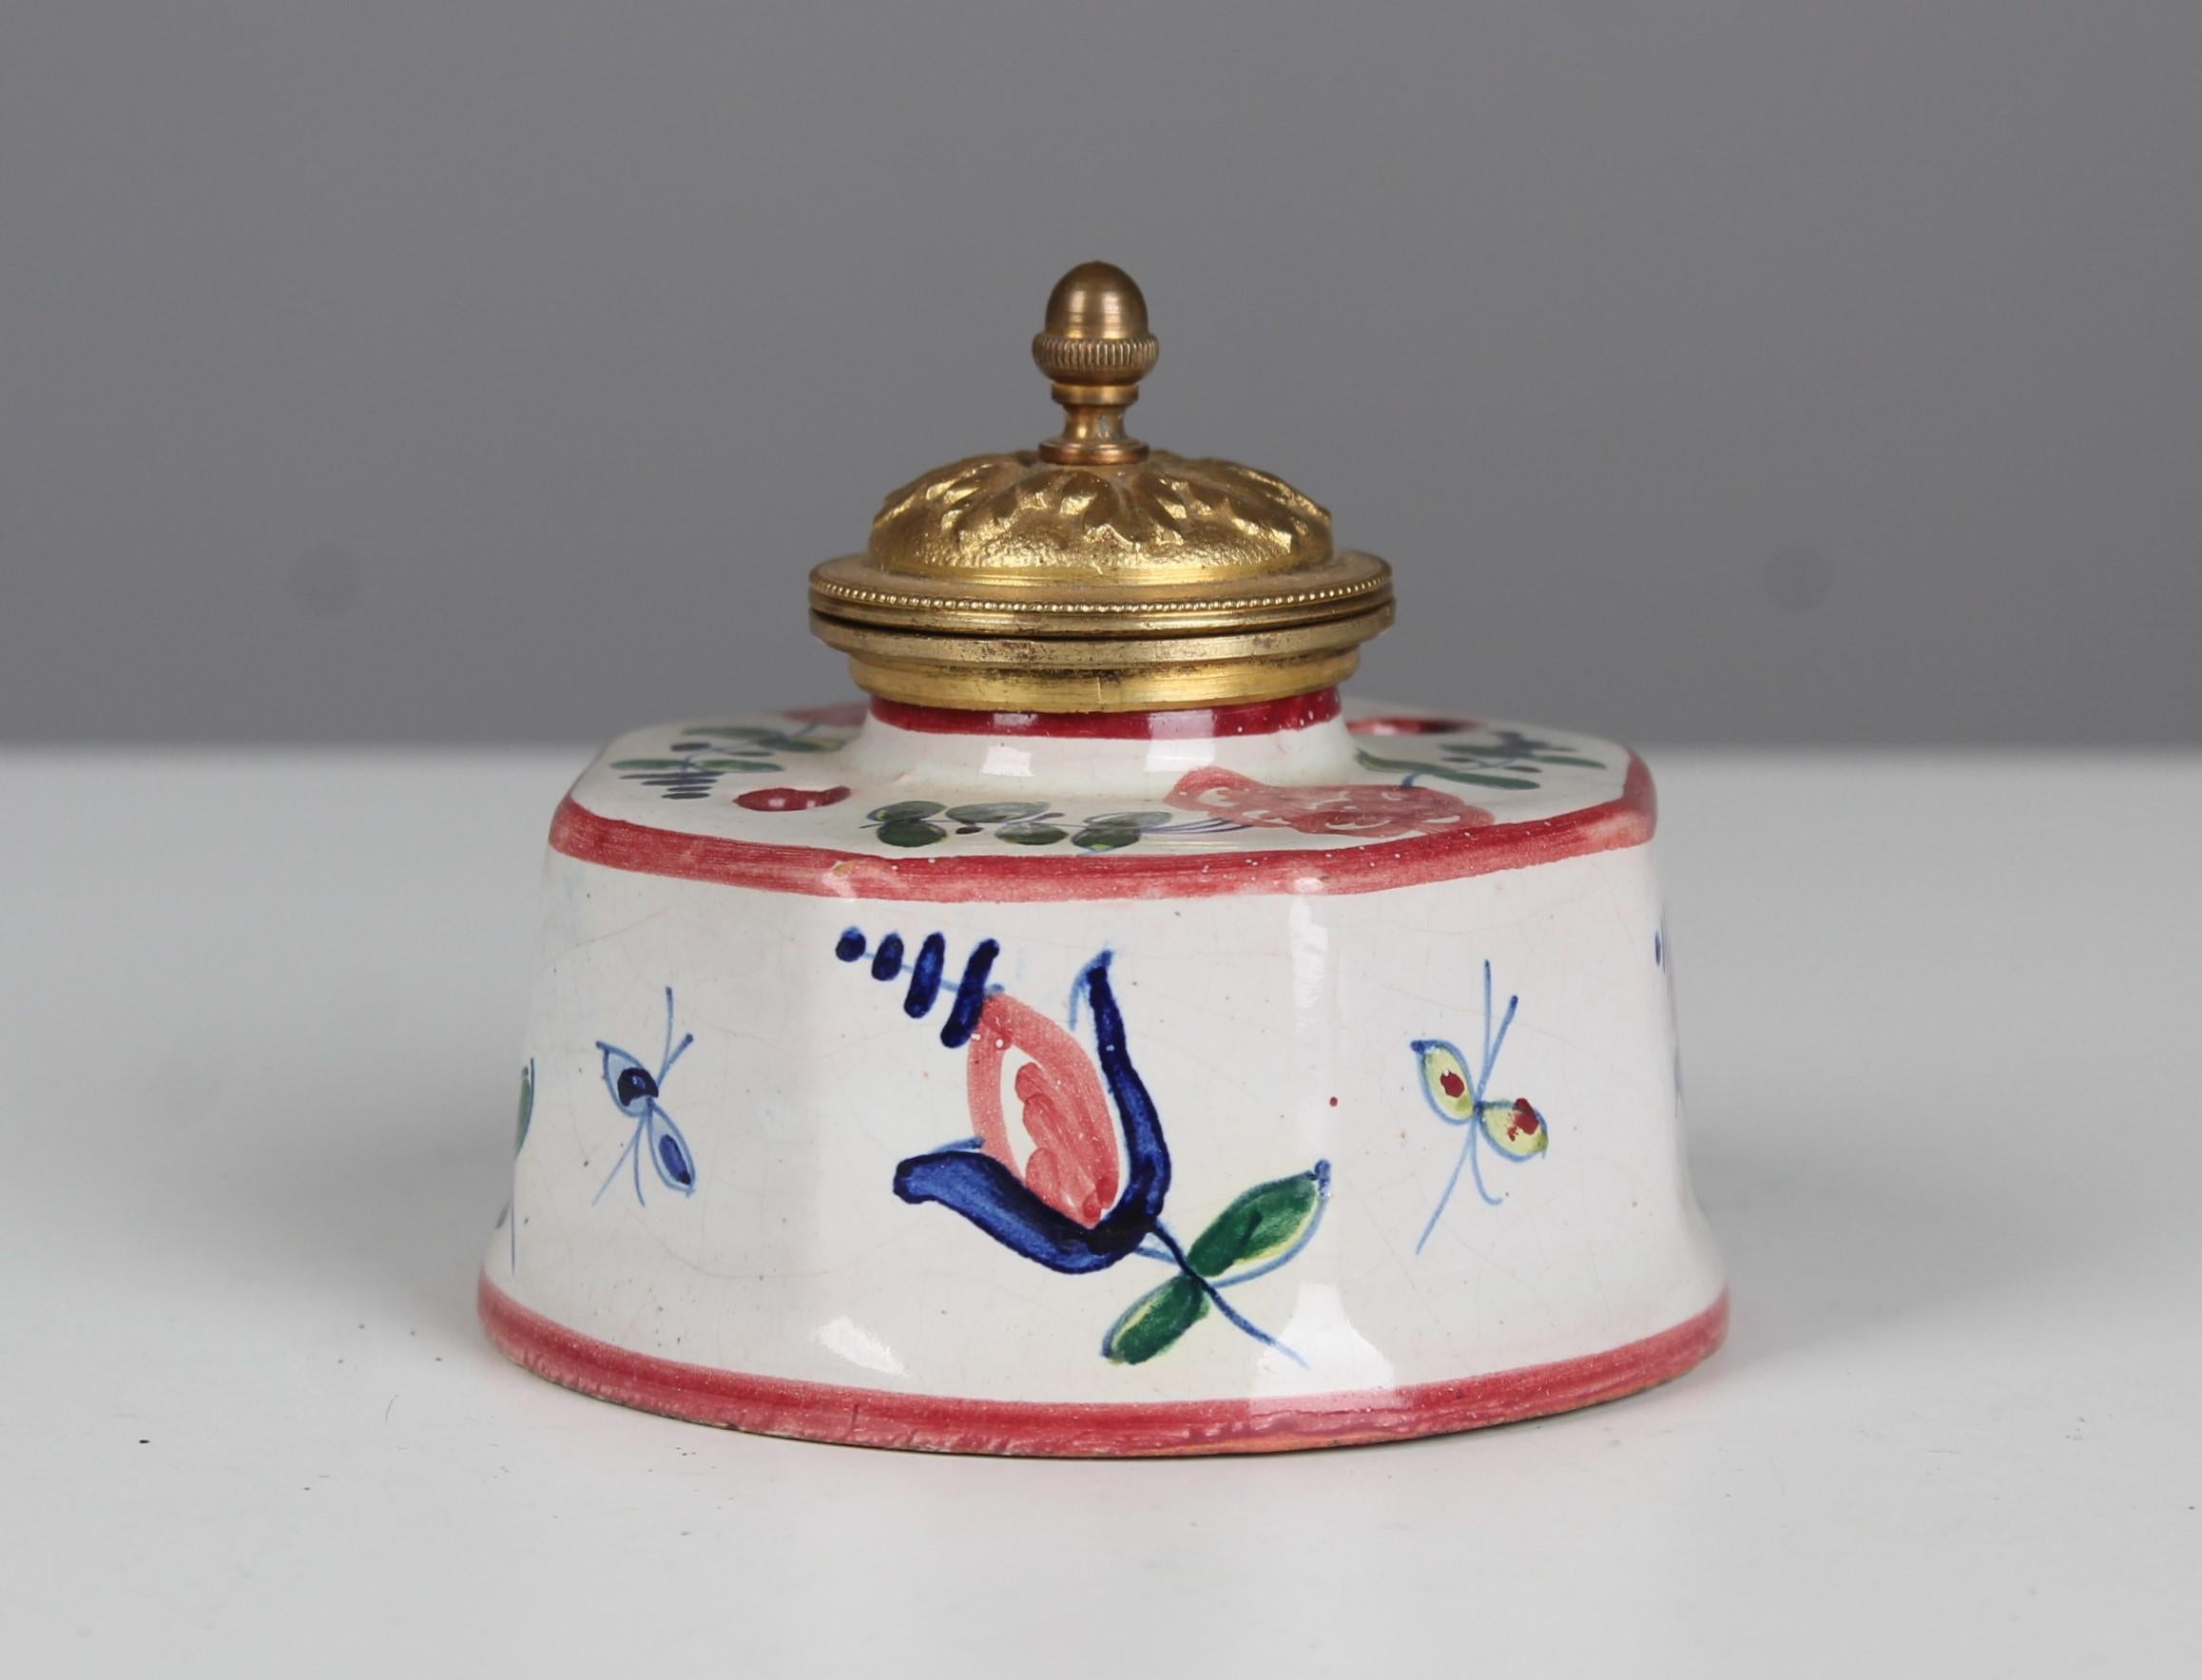 Beautiful Porcelain Inkwell from France, 1880s.
Wonderfully hand-painted with brass lid.